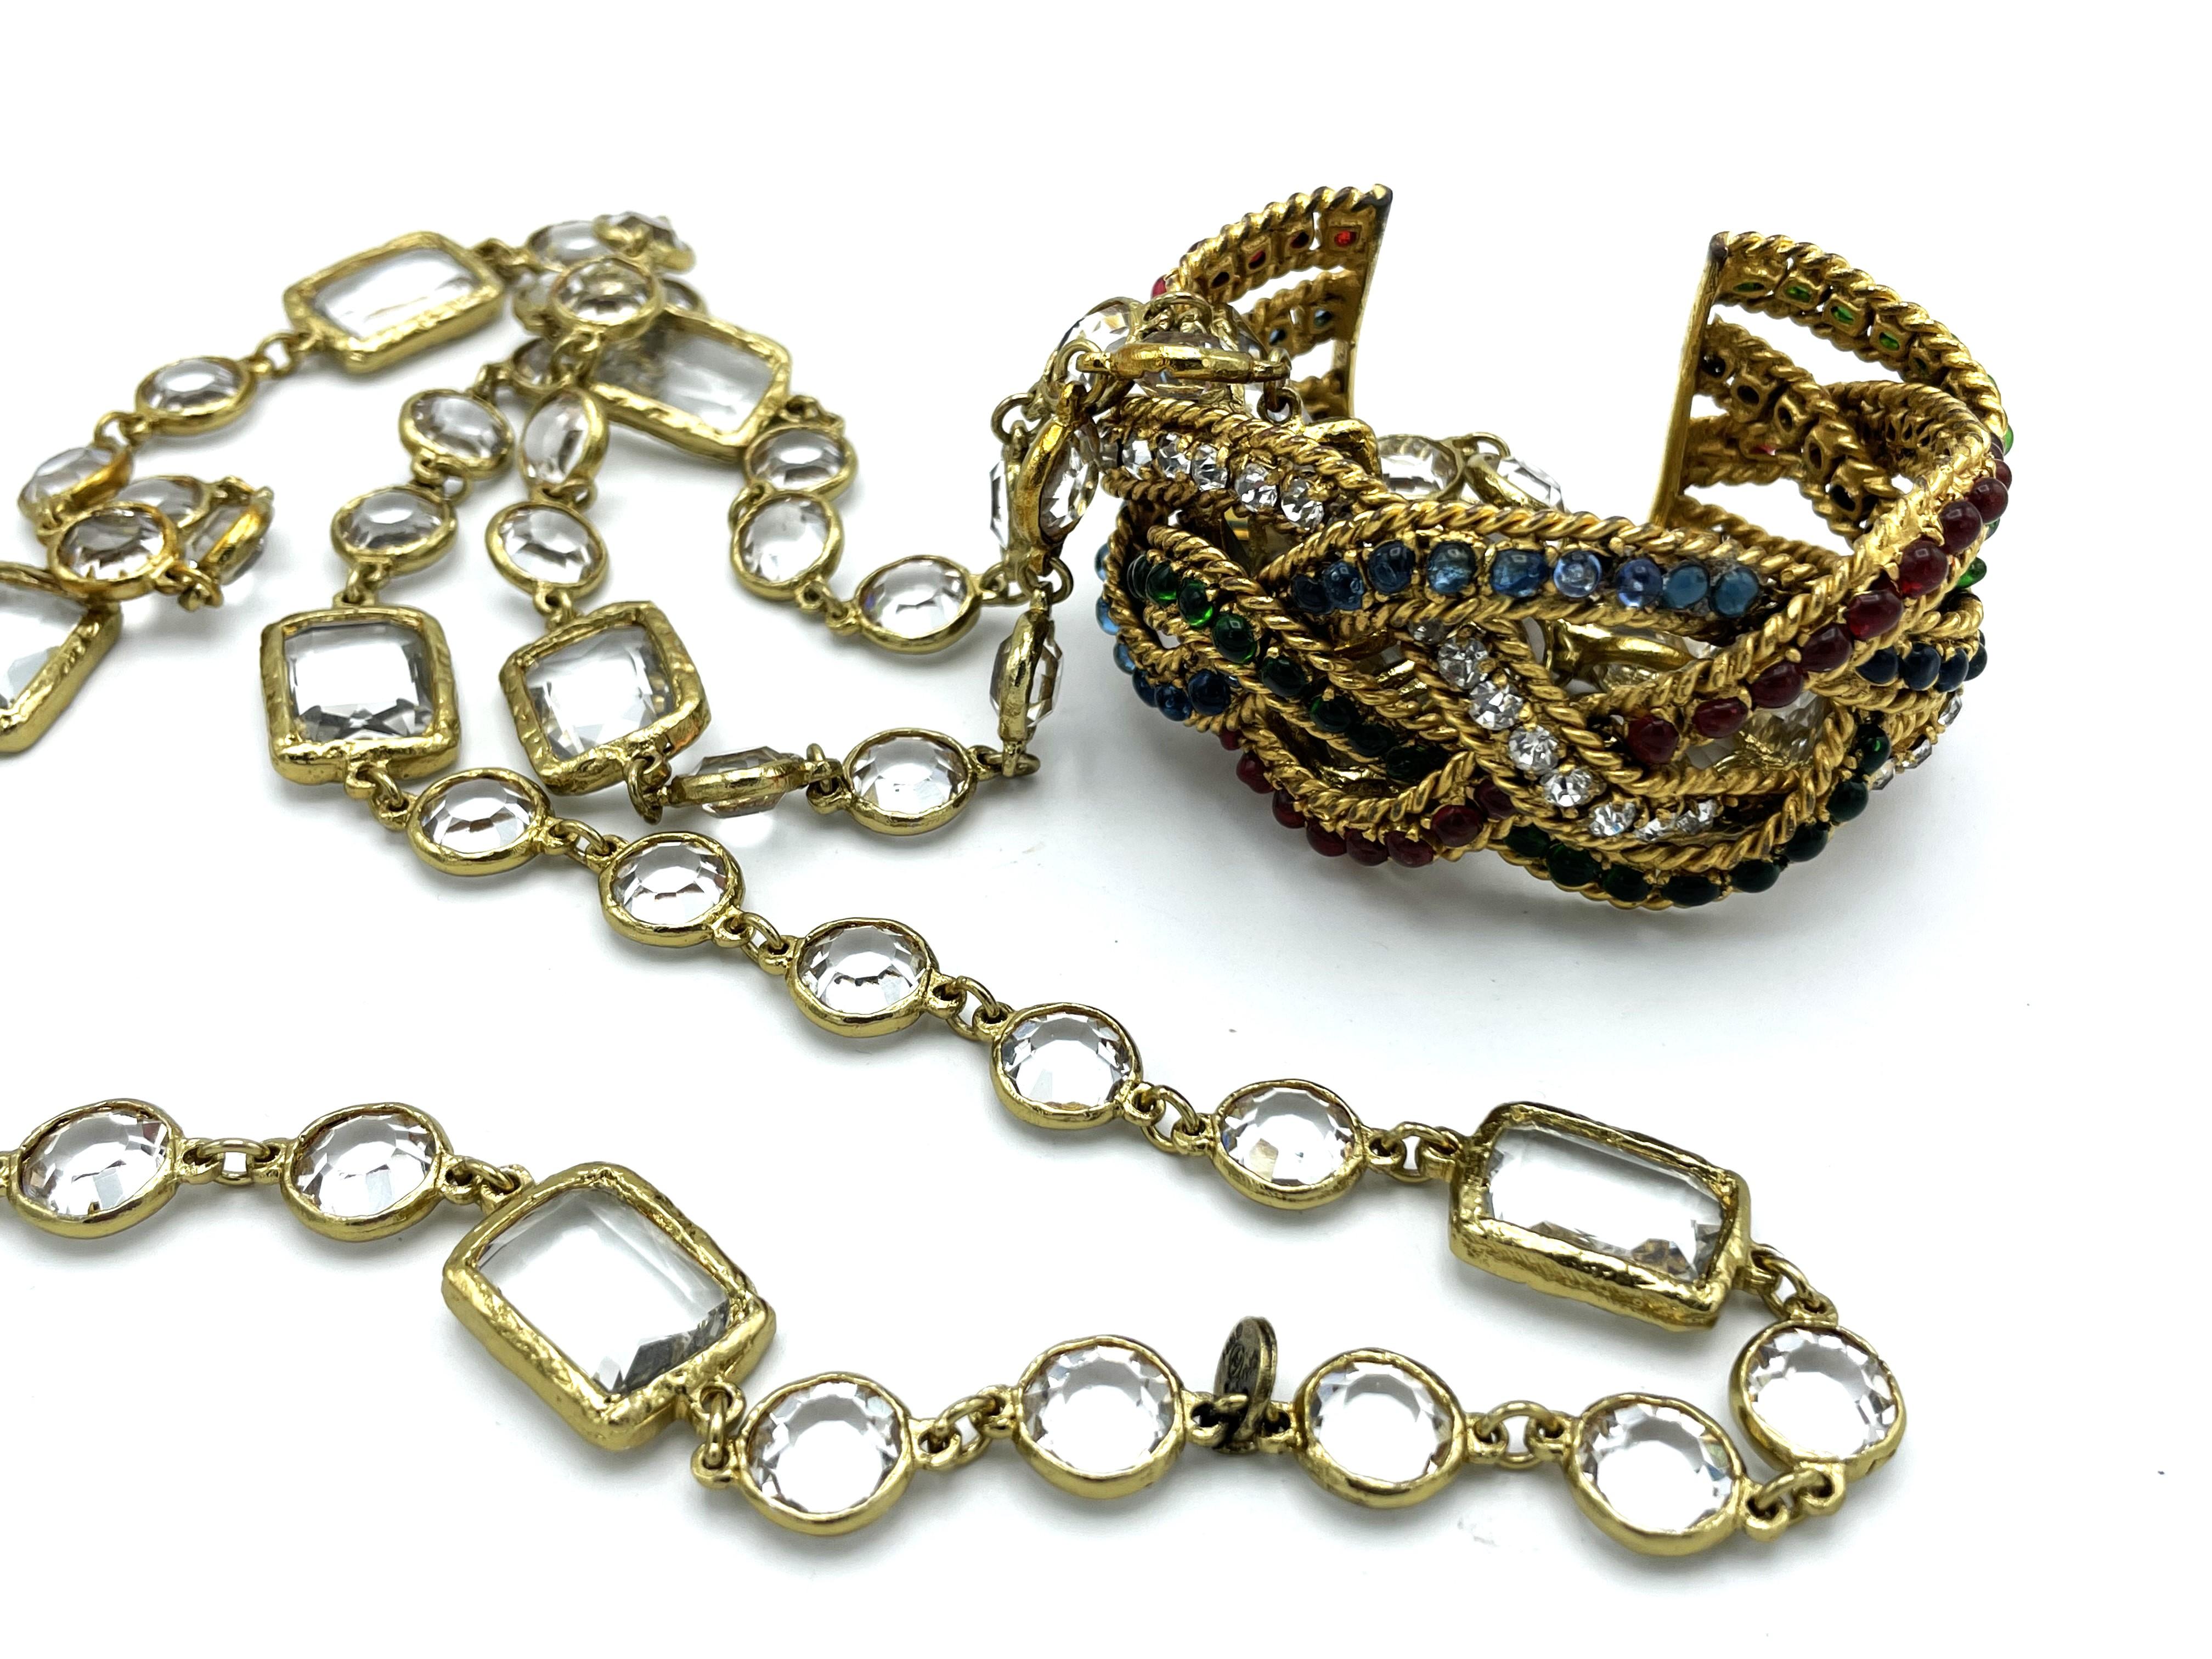 Mixed Cut Vintage CHANEL Necklace/Sautoir with 12 clear Chicklets, signed 1981, gold plate